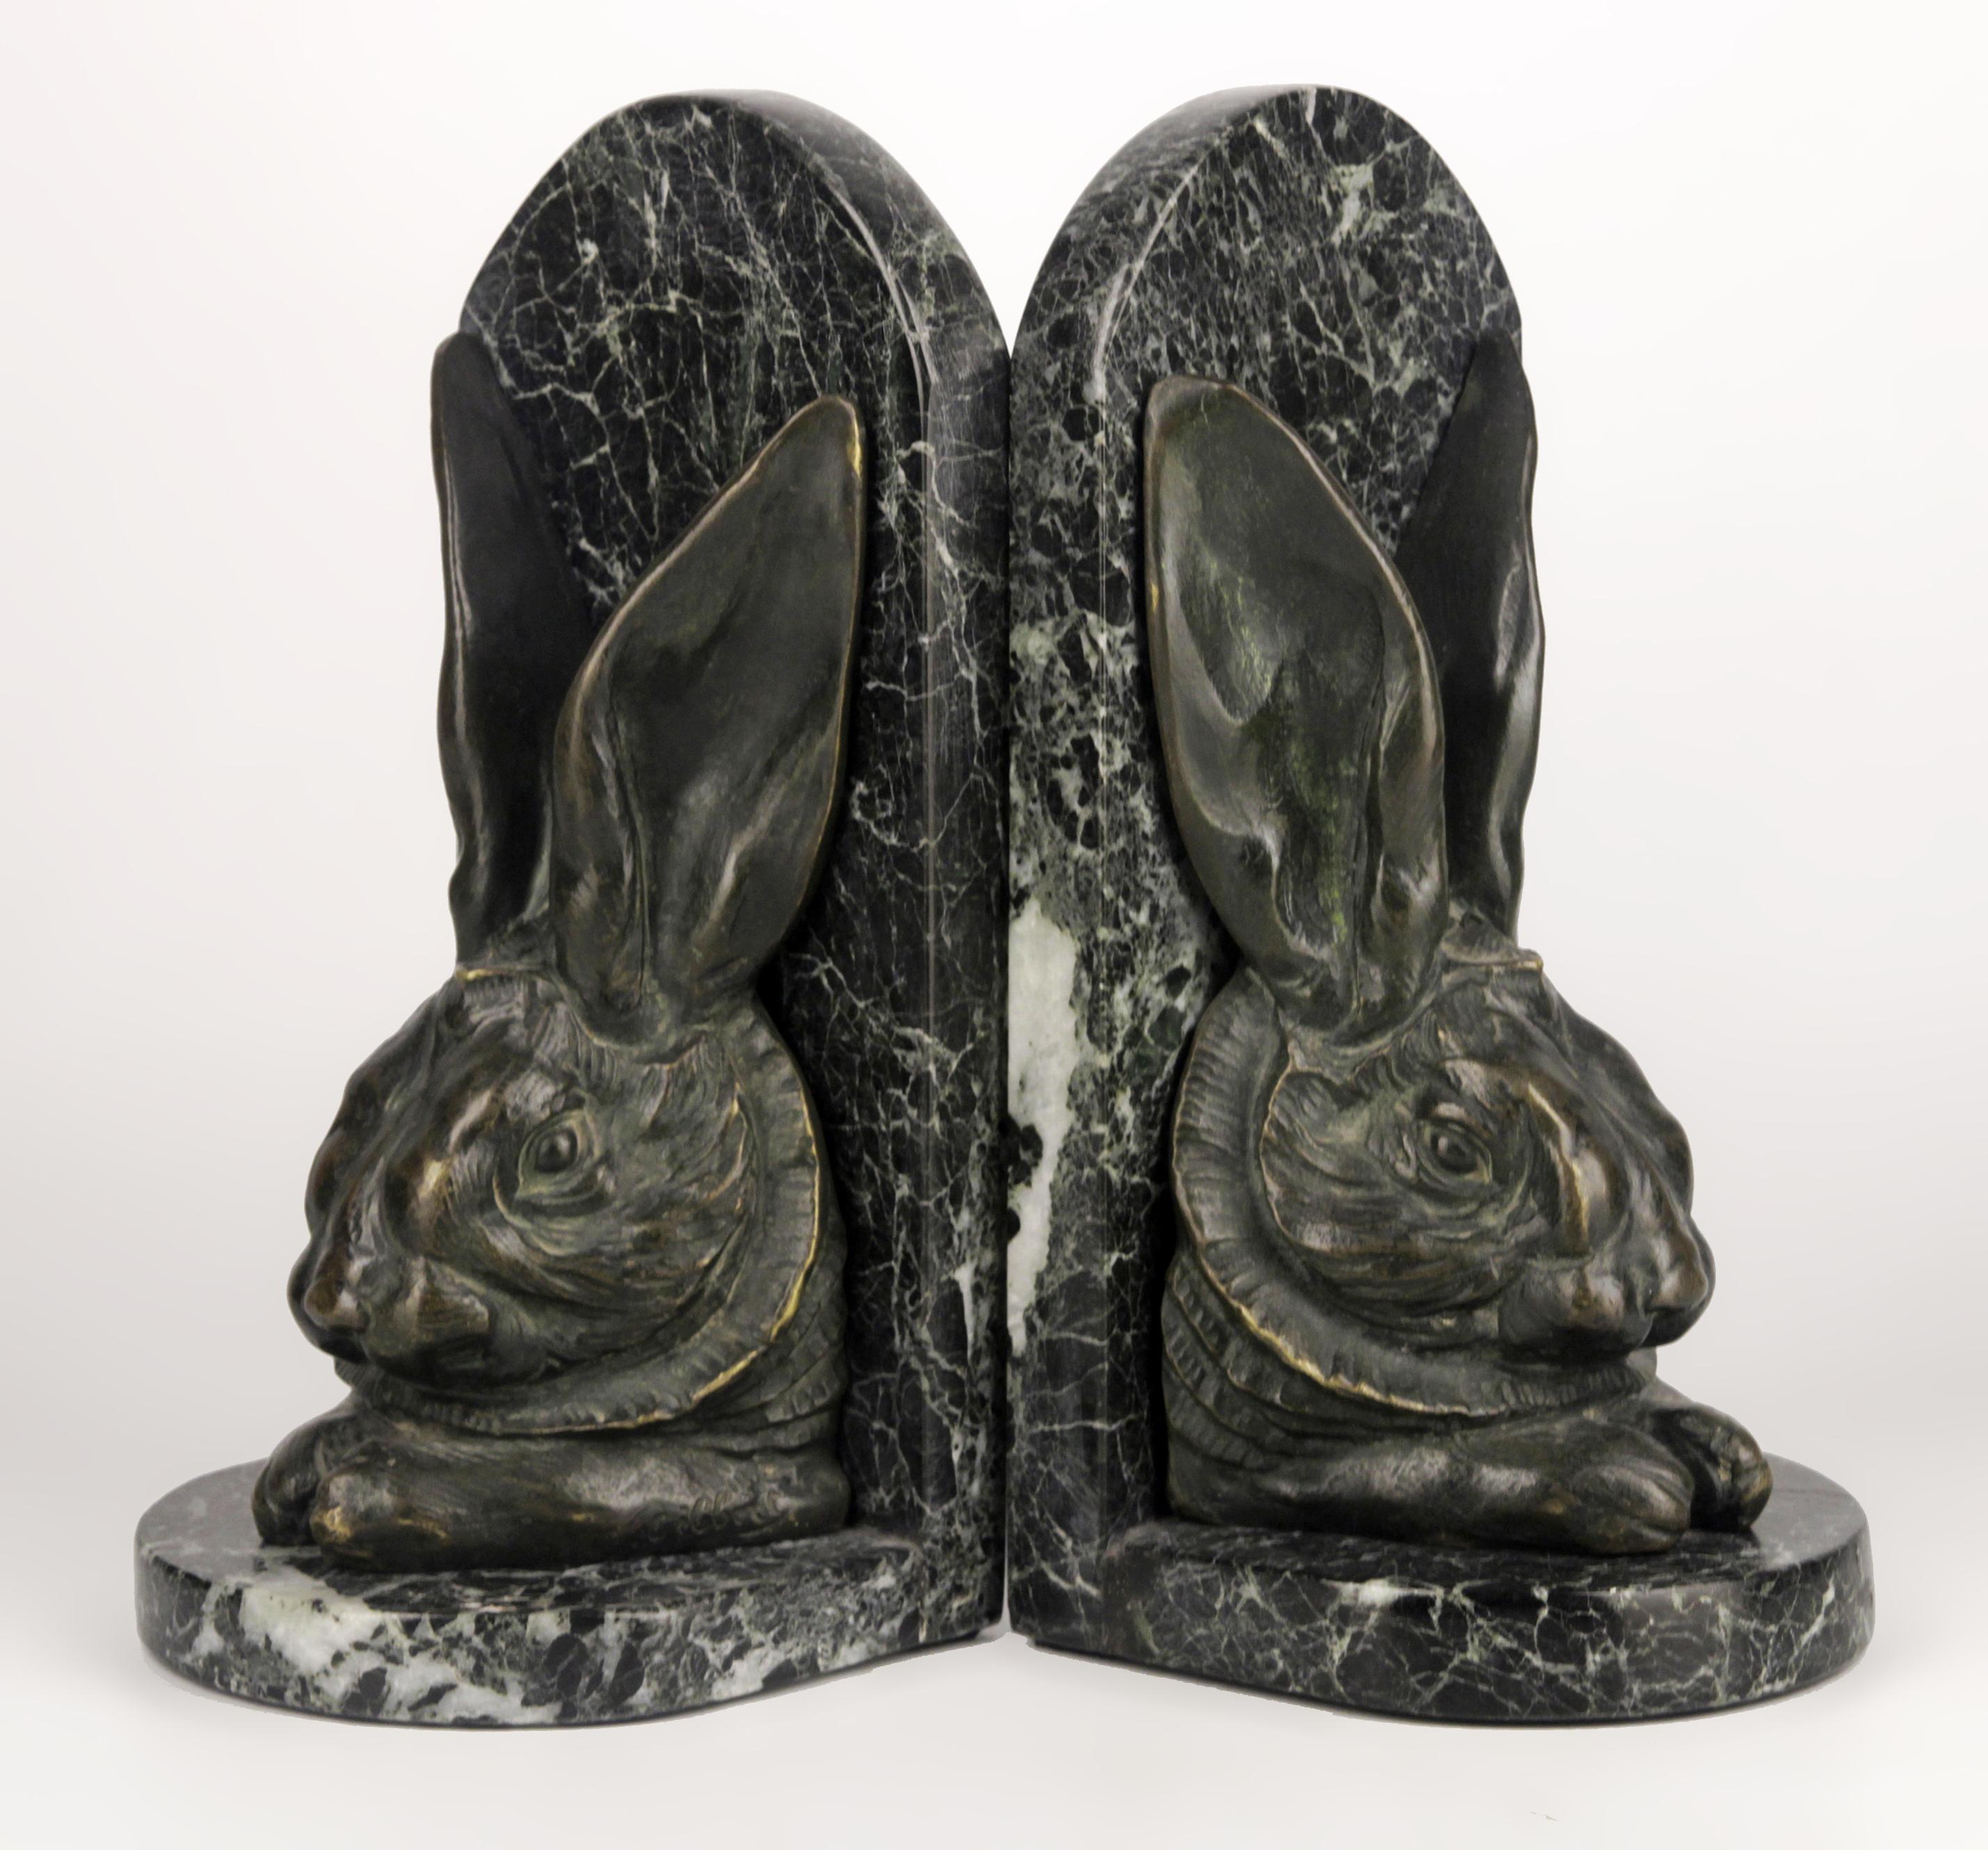 Pair of late 19th century Victorian bronze rabbit head bookends in marble plinths by Sir Alfred Gilbert

By: Sir Alfred Gilbert
Material: bronze, marble, copper, metal
Technique: cast, patinated, molded, metalwork
Dimensions: 4 in x 4 in x 8.5